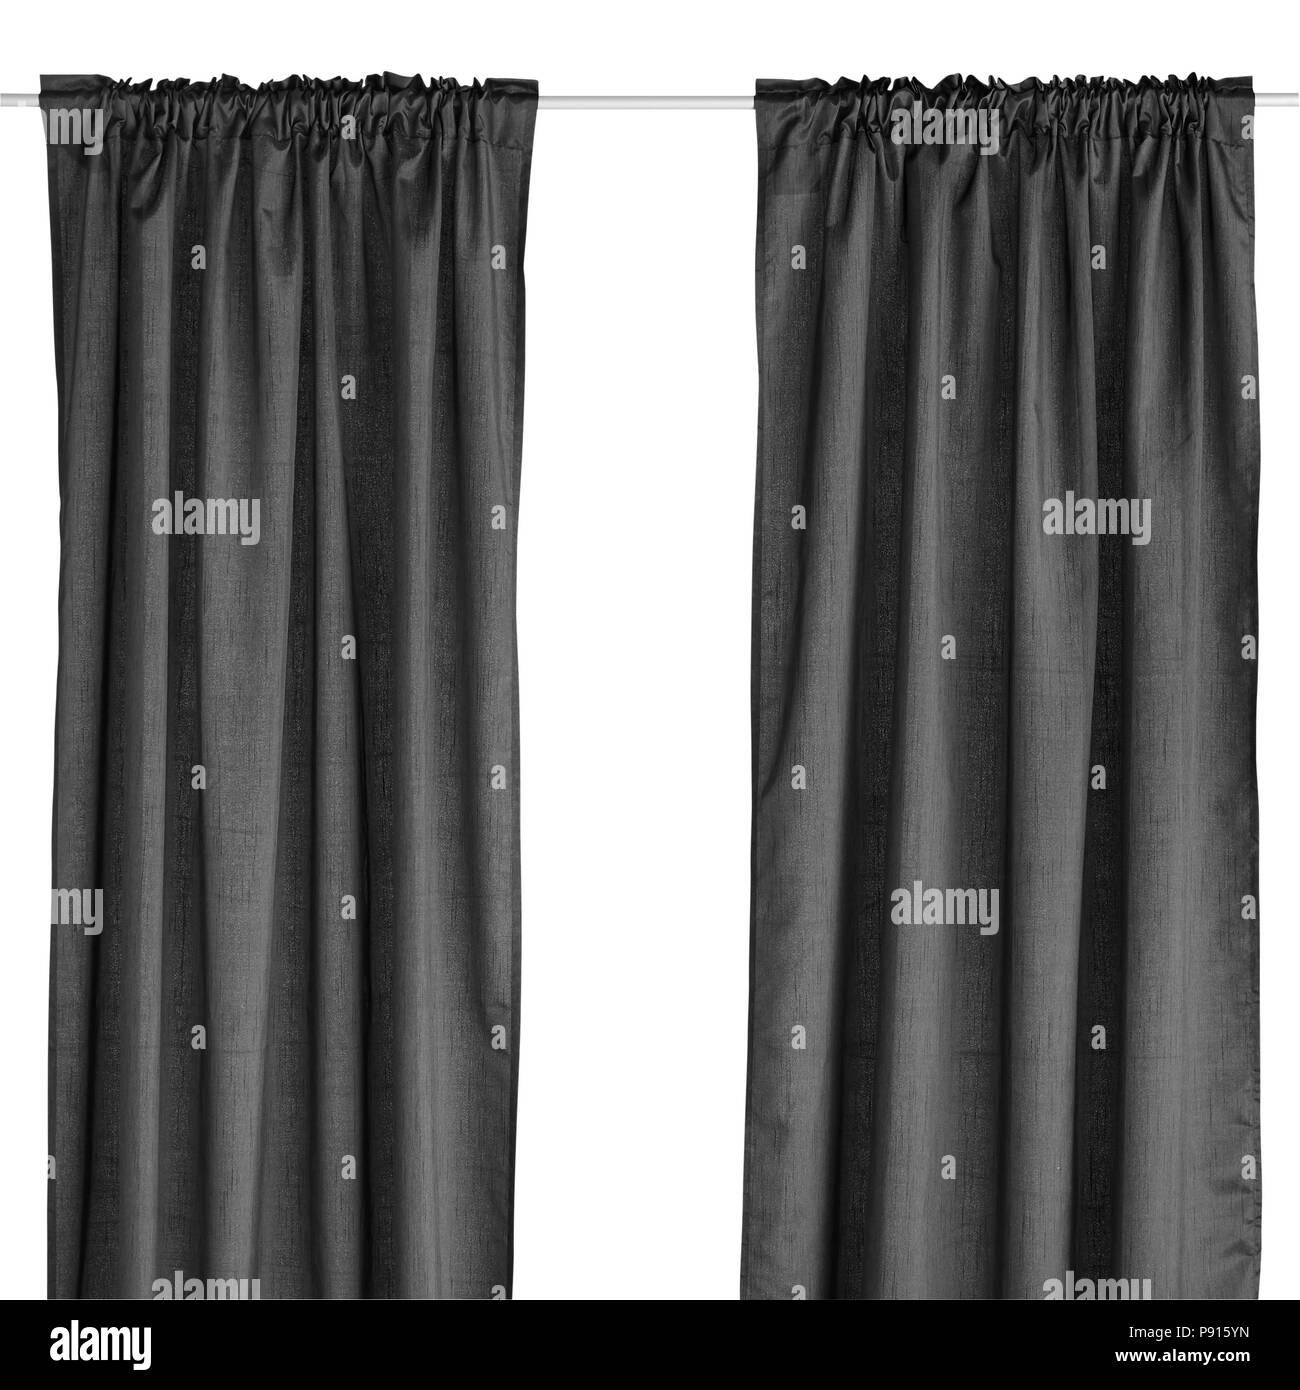 Black curtain. Isolated on white background. Include clipping path. Stock Photo